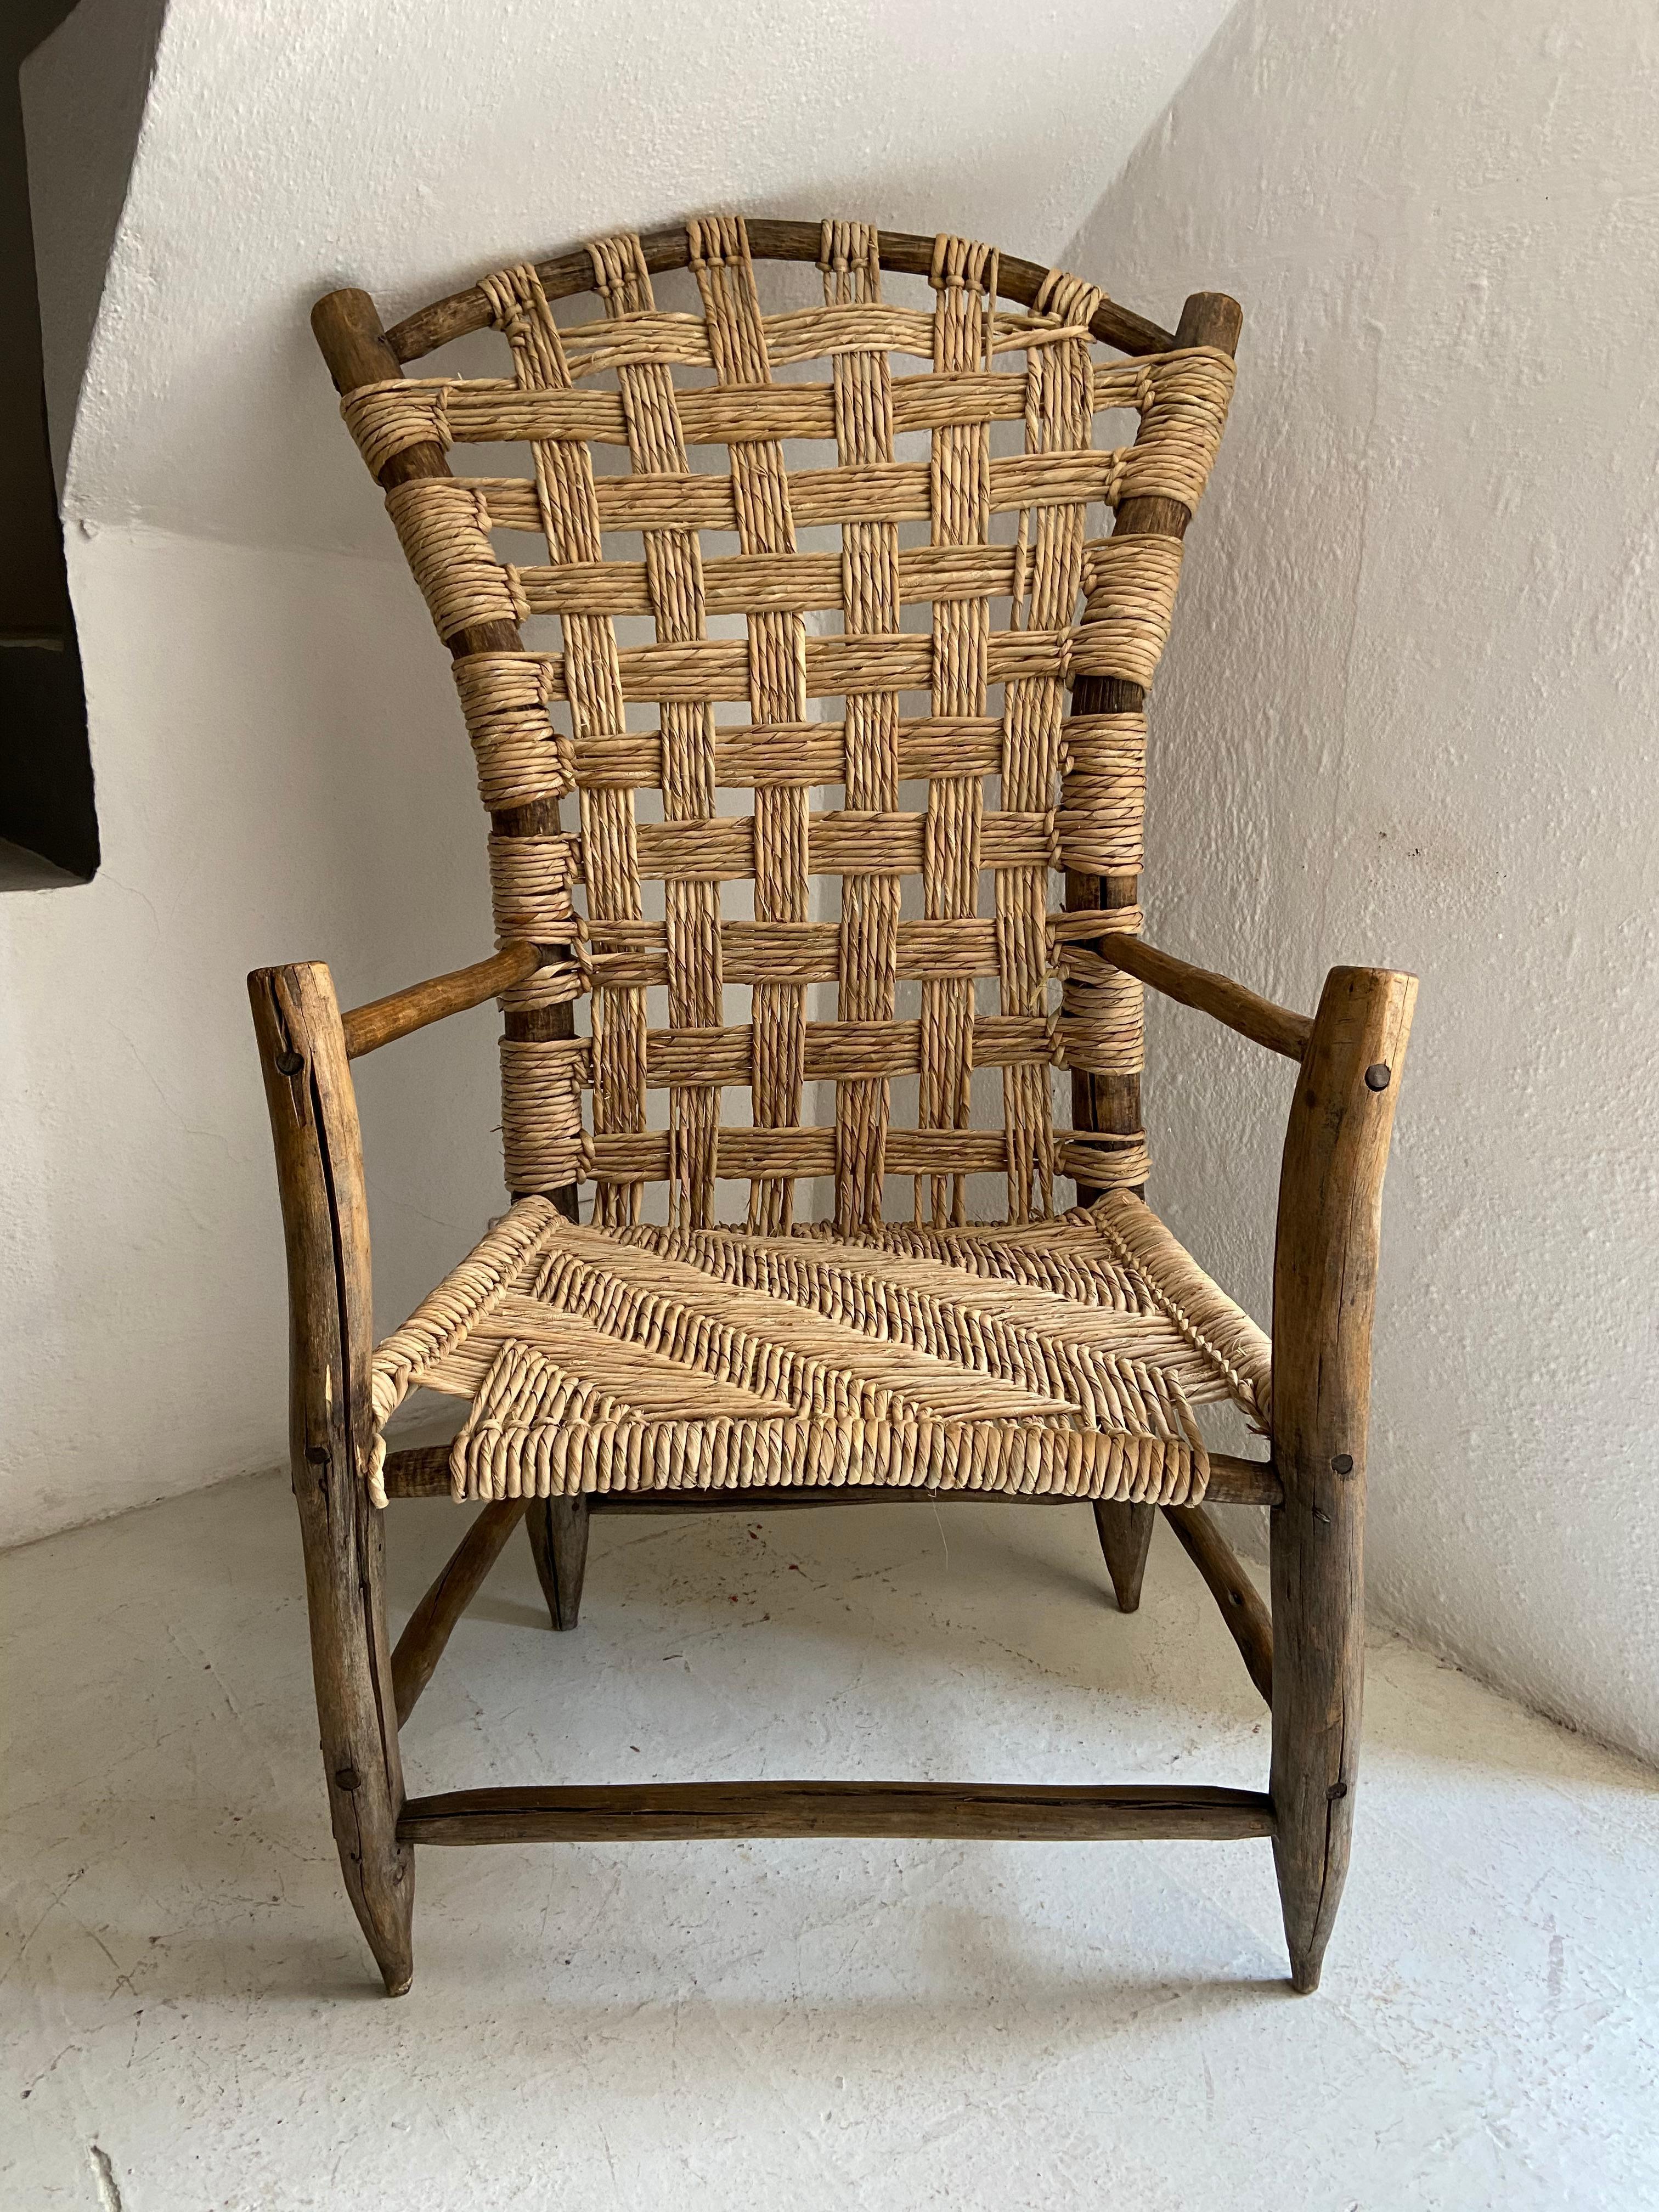 Rustic, country chair from Dolores Hidalgo, Guanajuato, circa 1960's. Newly re-woven seat and backrest by Antonio Vidal using 